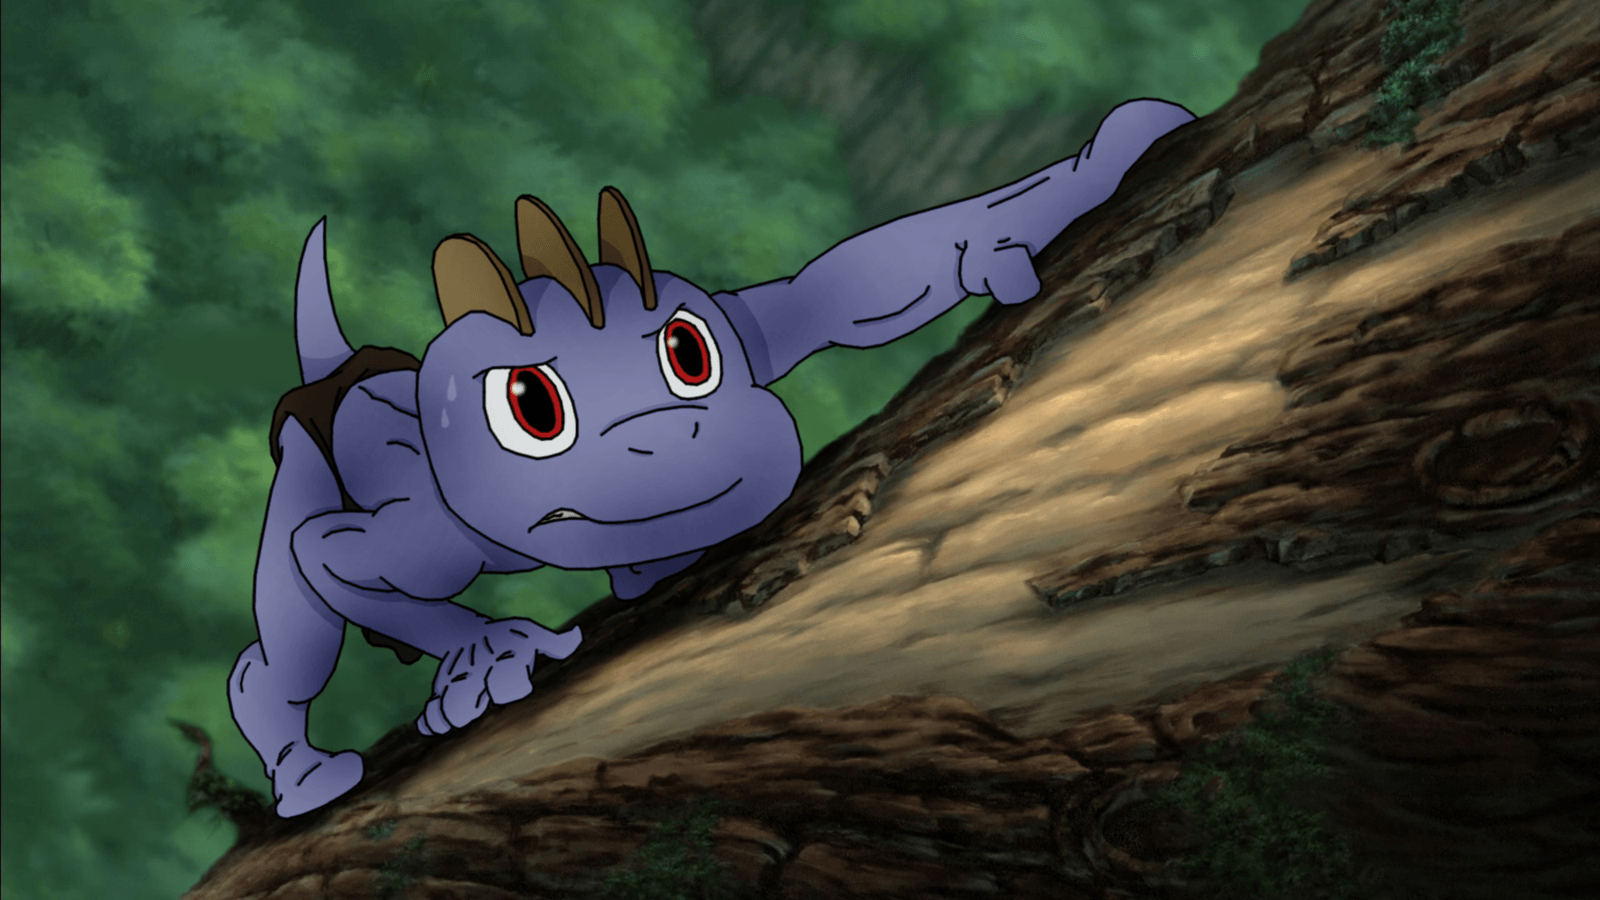 MACHOP AS YOUNG TARZAN: Learning To Survive By PoKeMoN Traceur